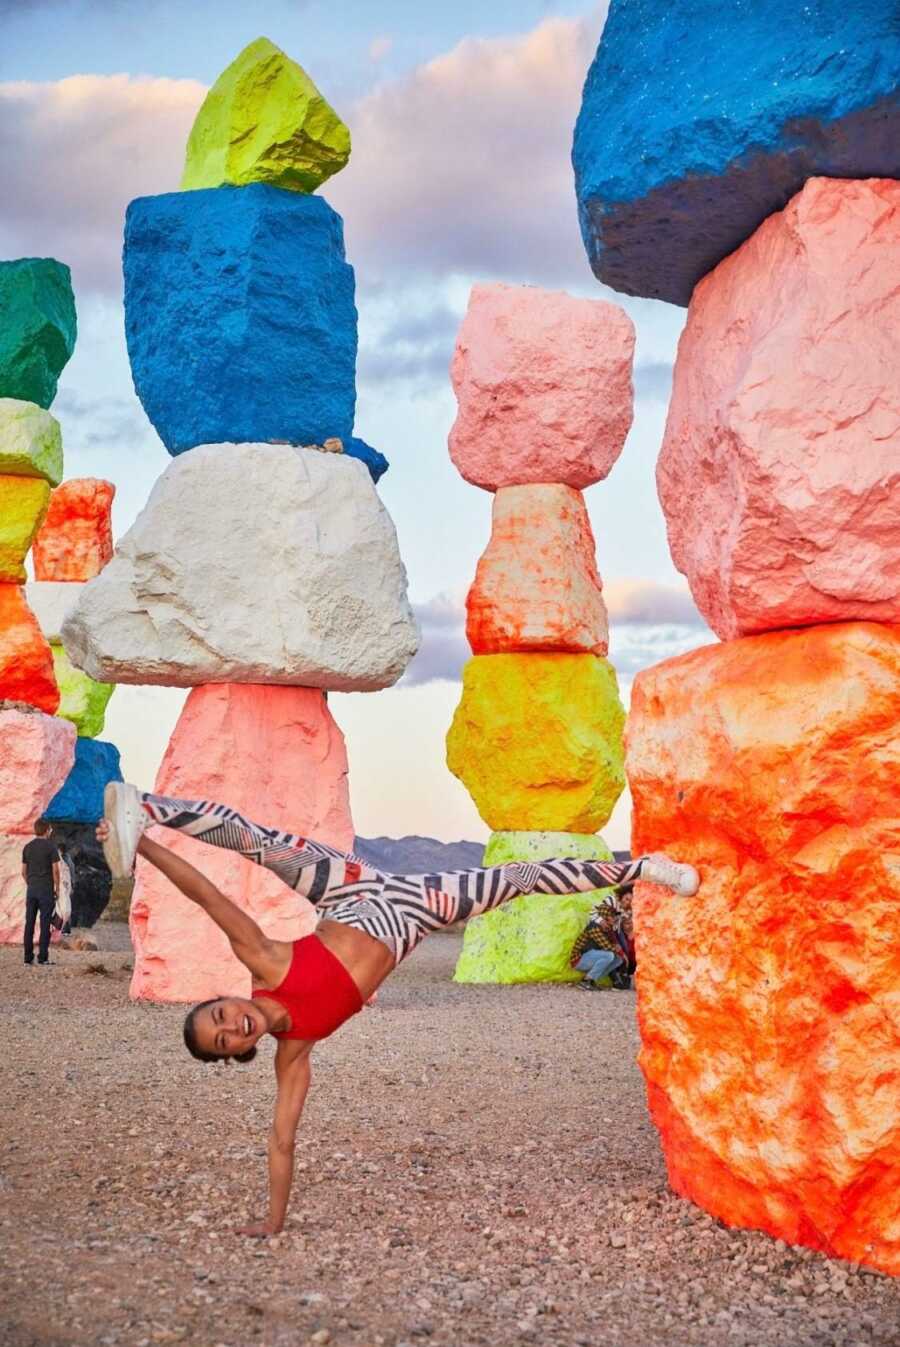 Woman strikes yoga pose while leaning on colorful rocks with more colorful rocks behind her